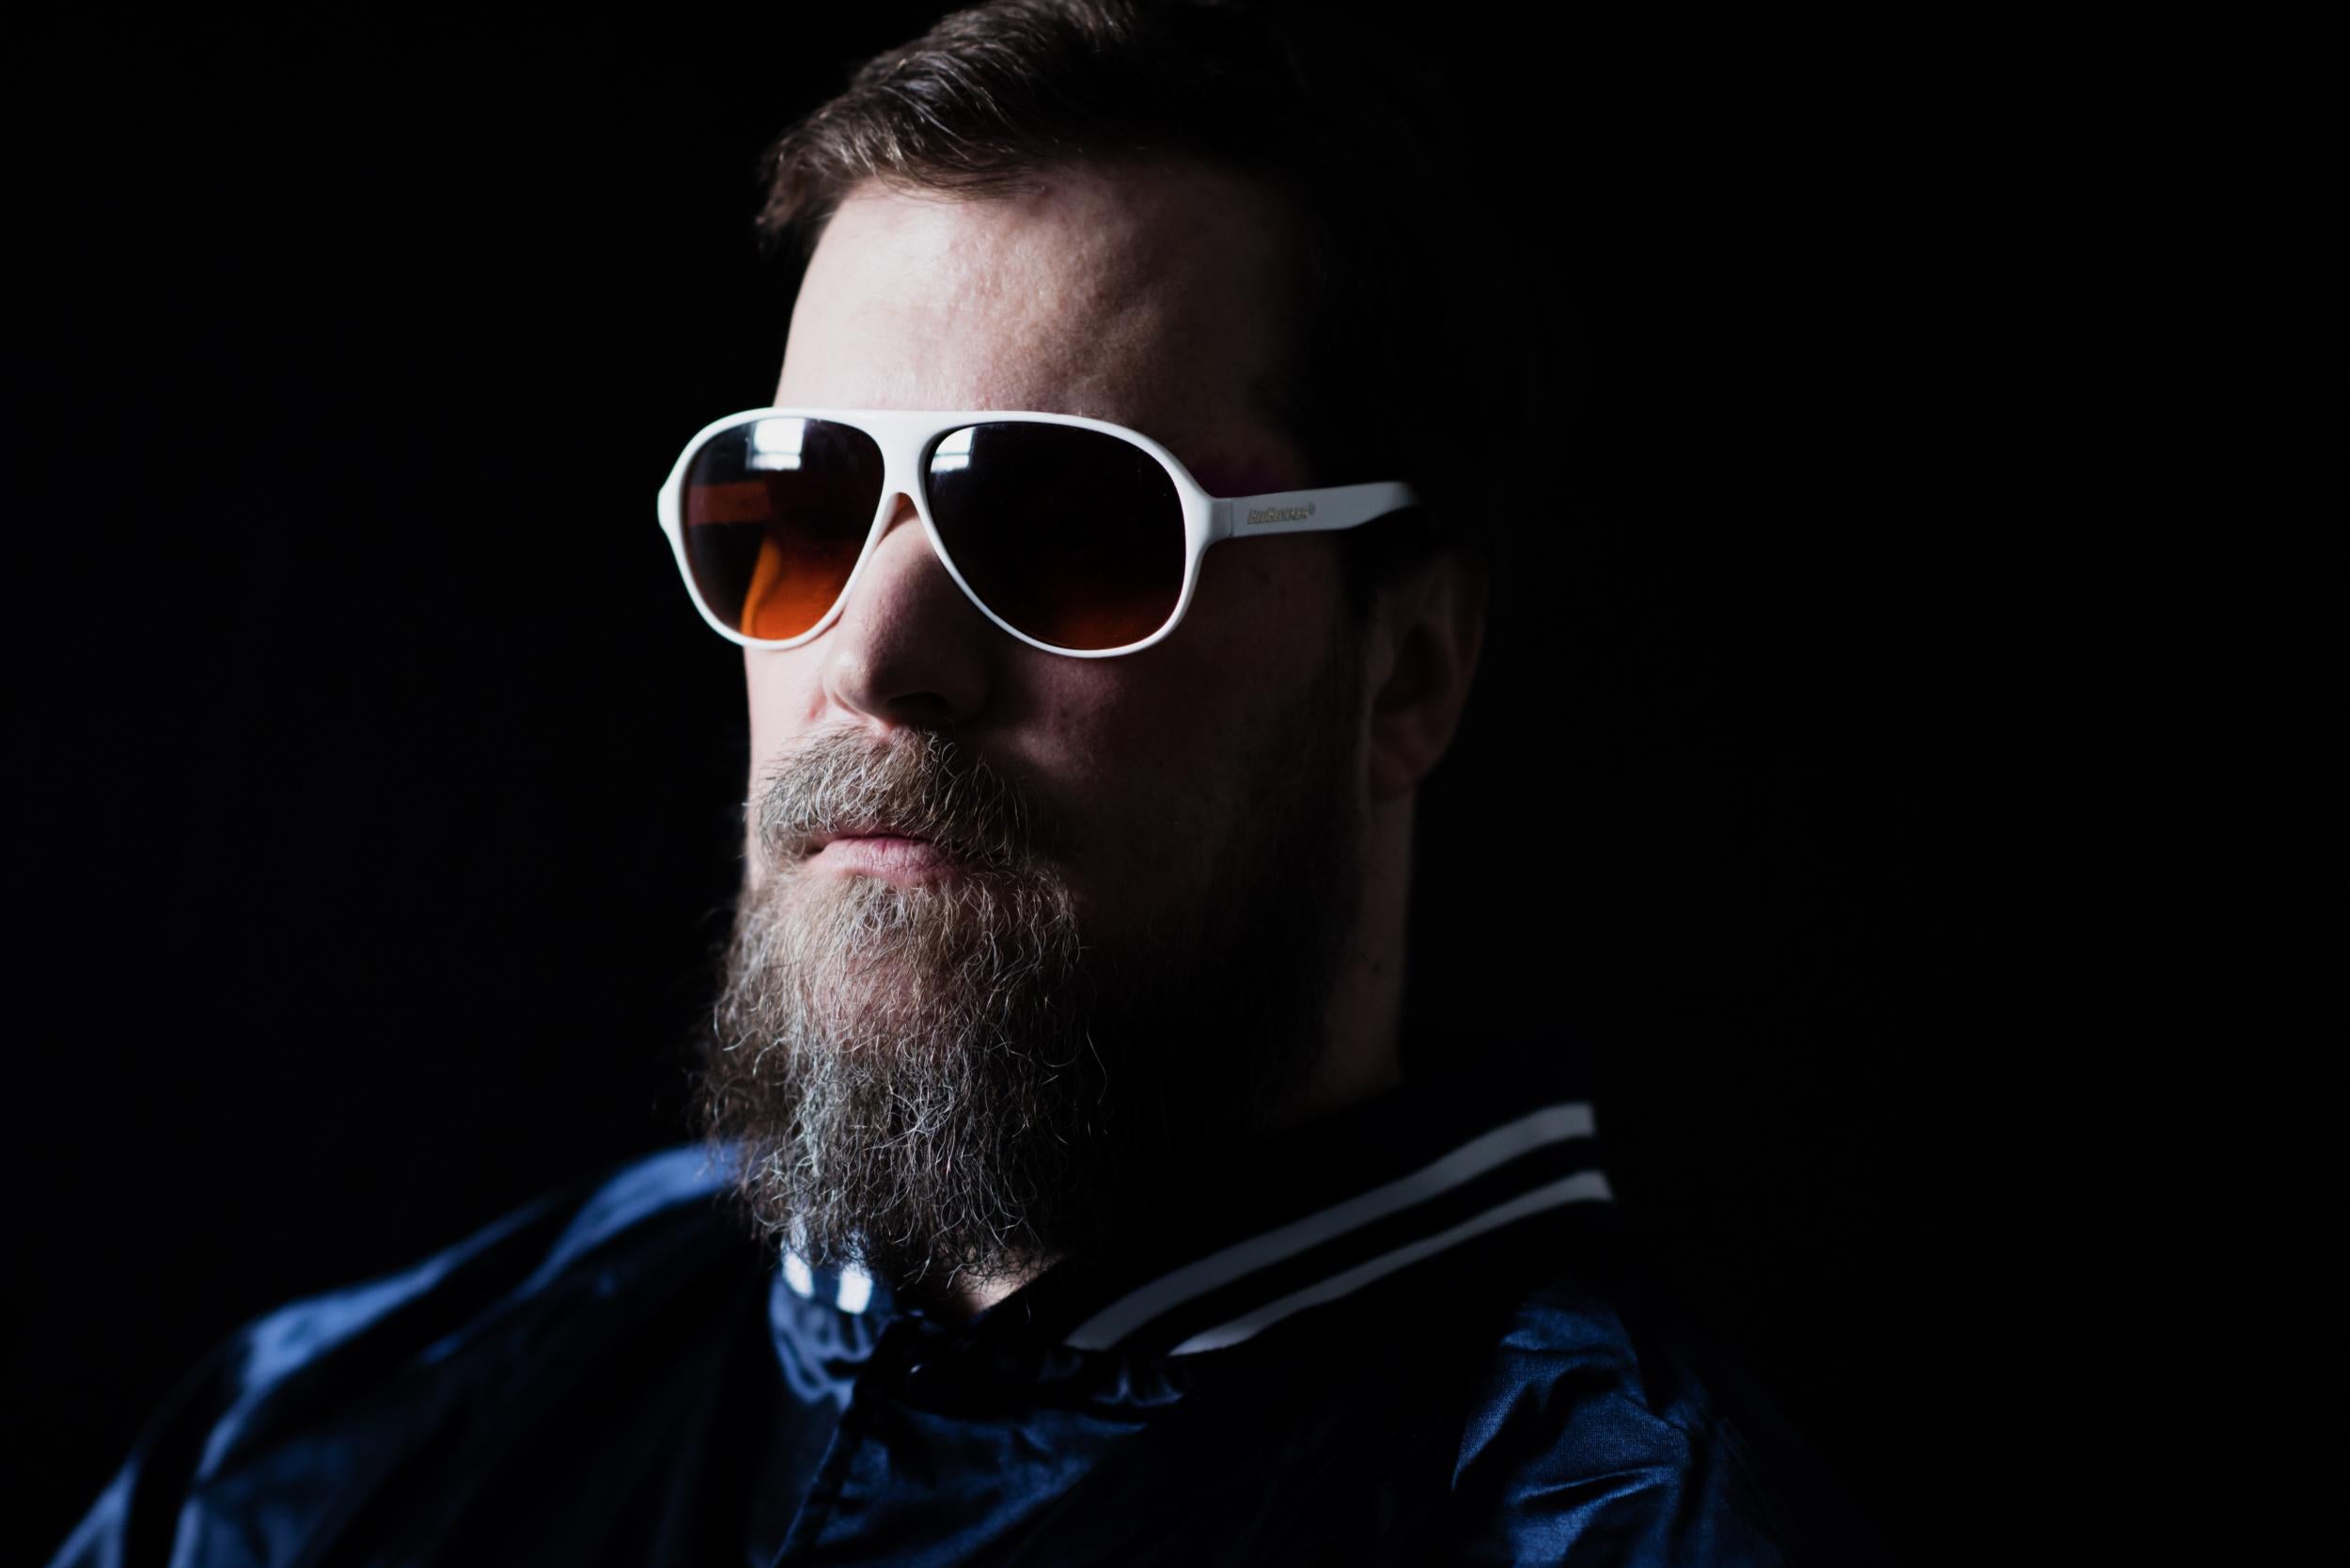 John Grant takes listeners on a thrill ride with his new album 'Love Is Magic'